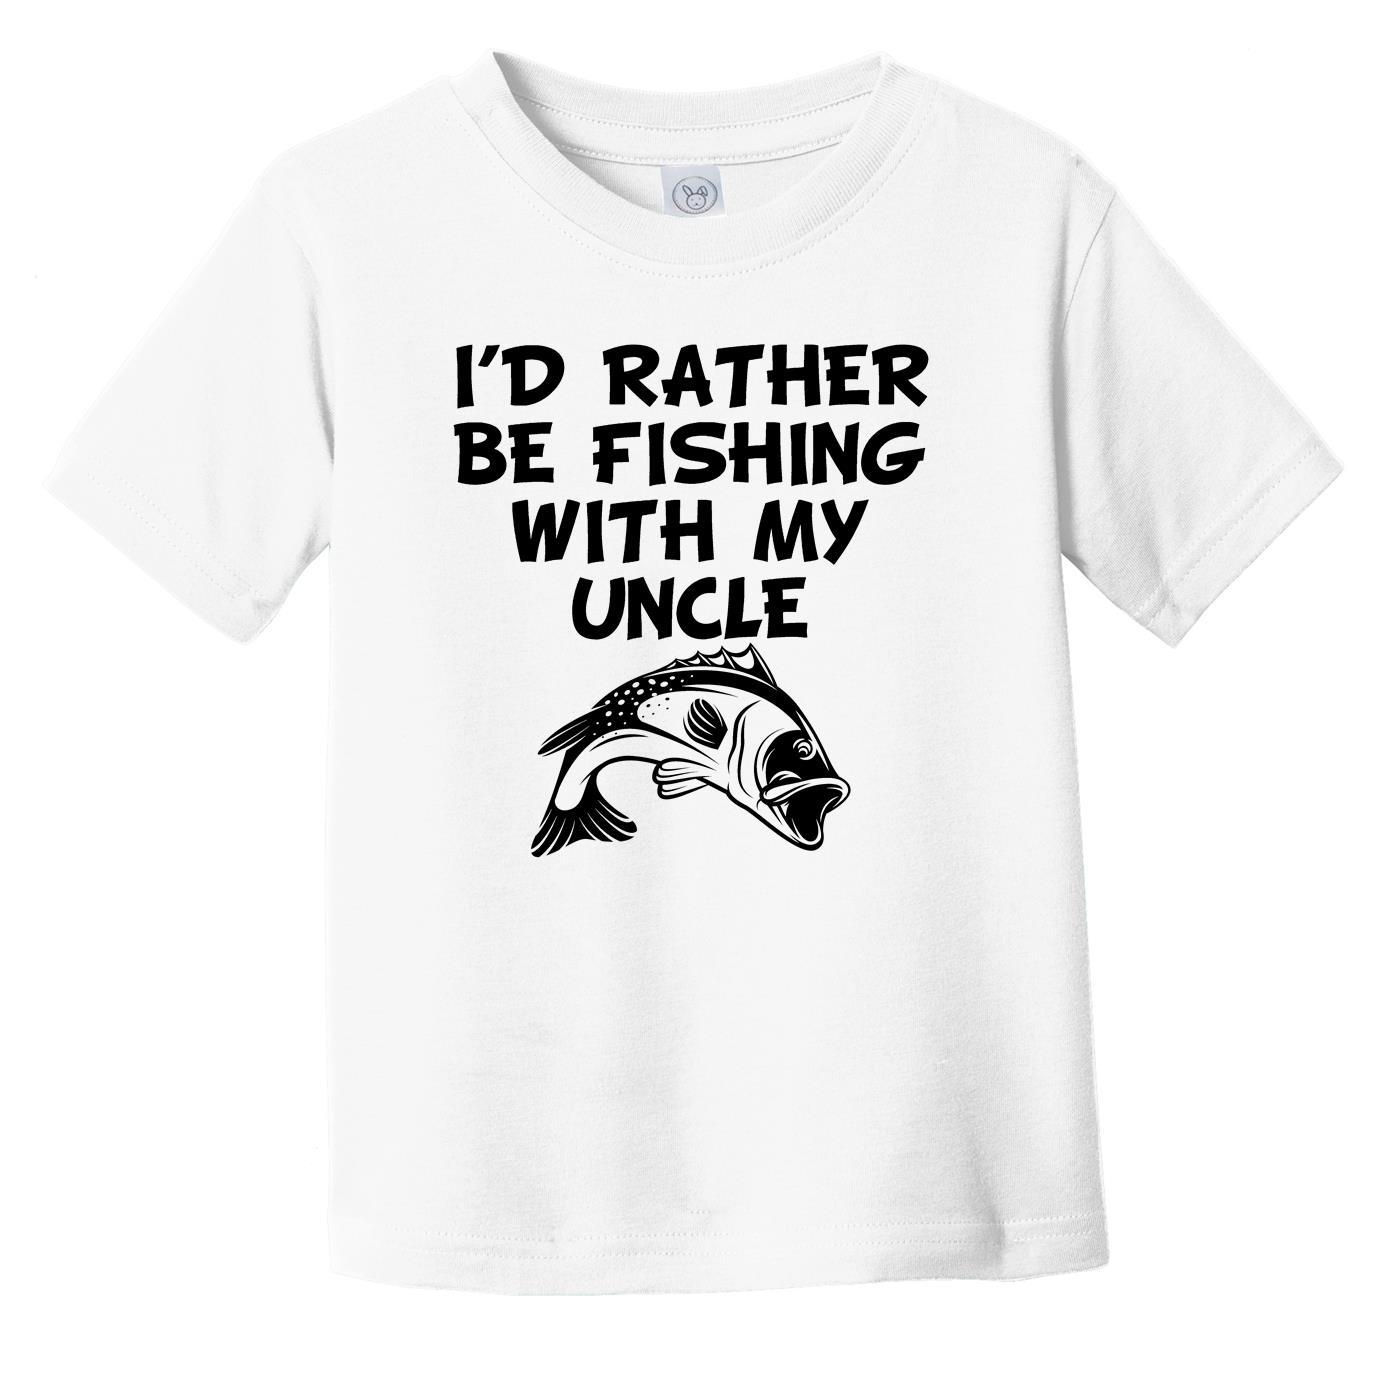 I'd Rather Be Fishing With My Uncle Funny Infant Toddler T-Shirt